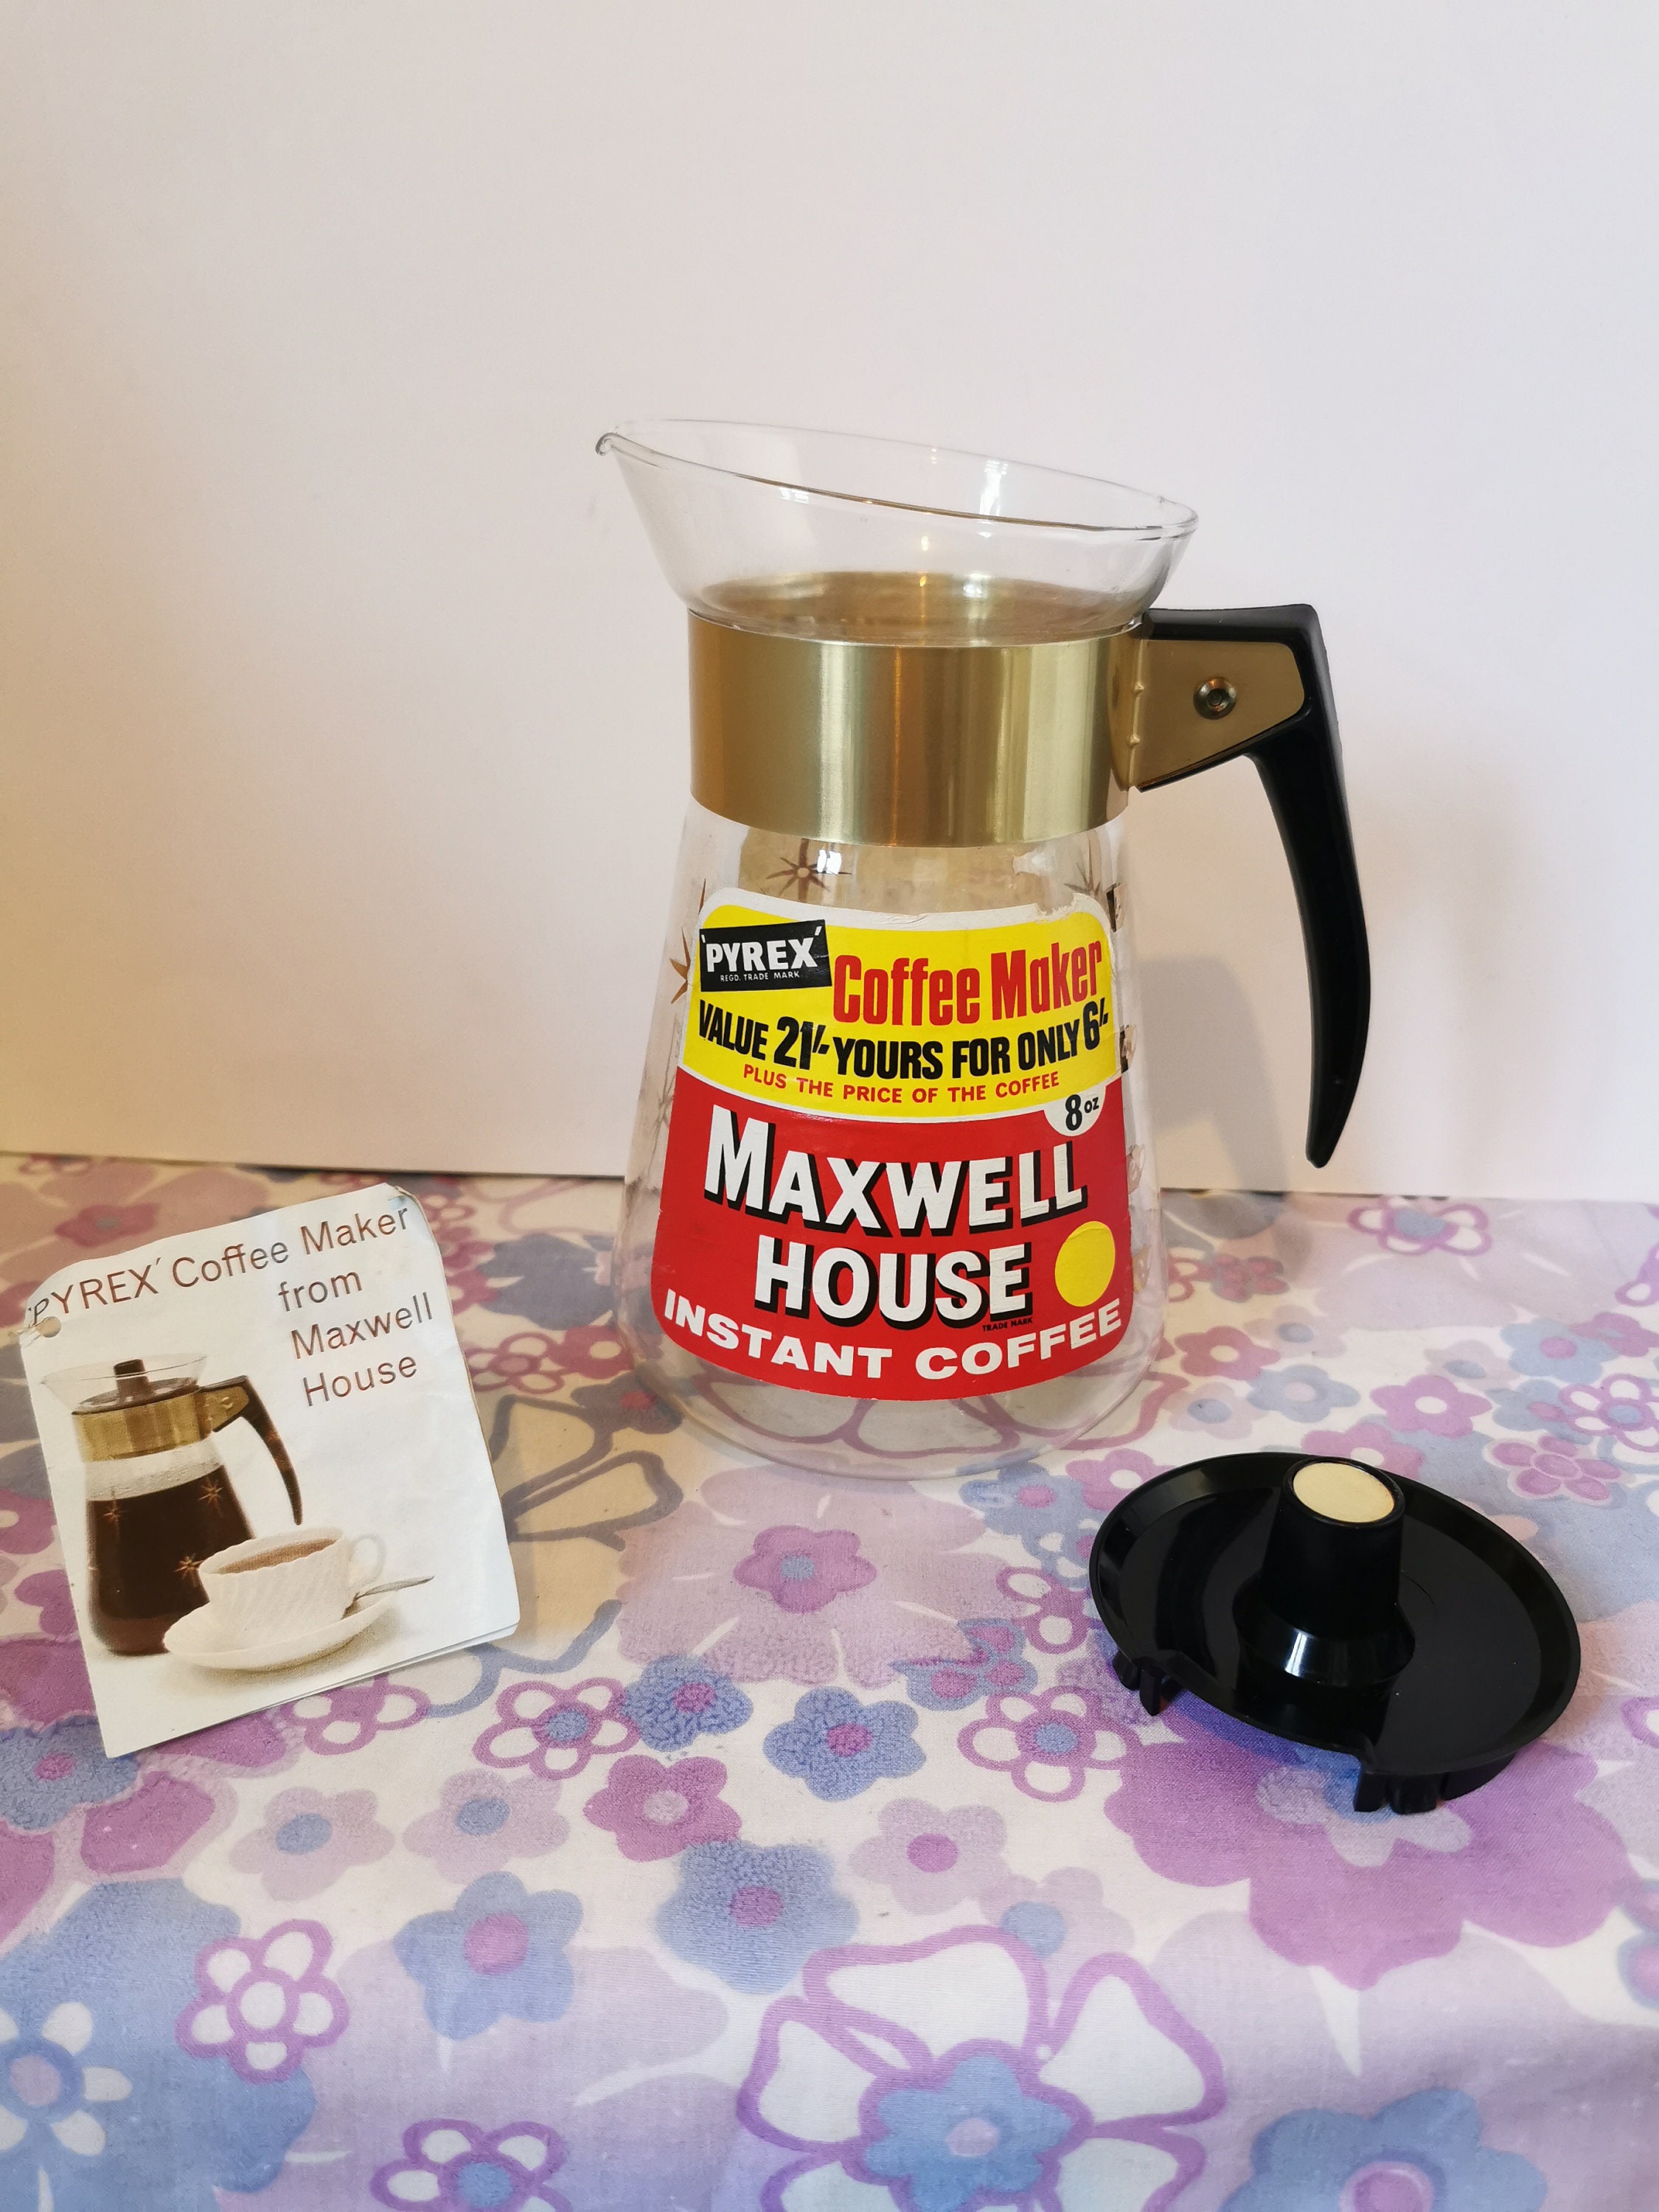 ORIGINAL ANTIQUE MAXWELL HOUSE COFFEE WALL THERMOMETER